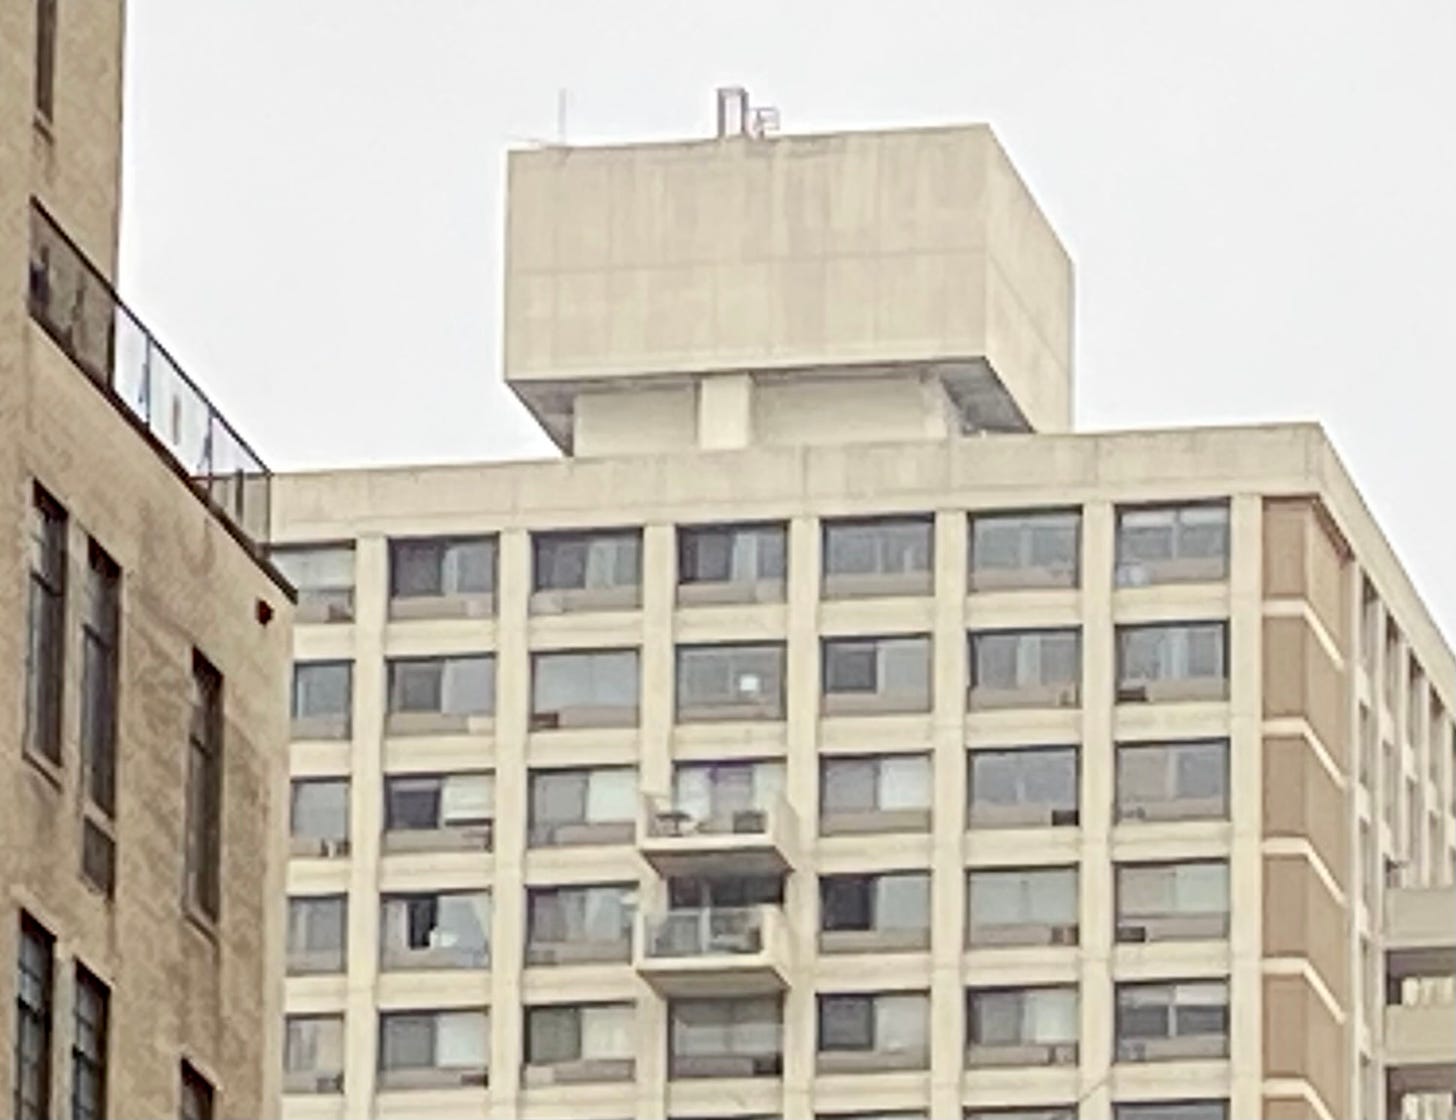 A closer image of the box on the roof.